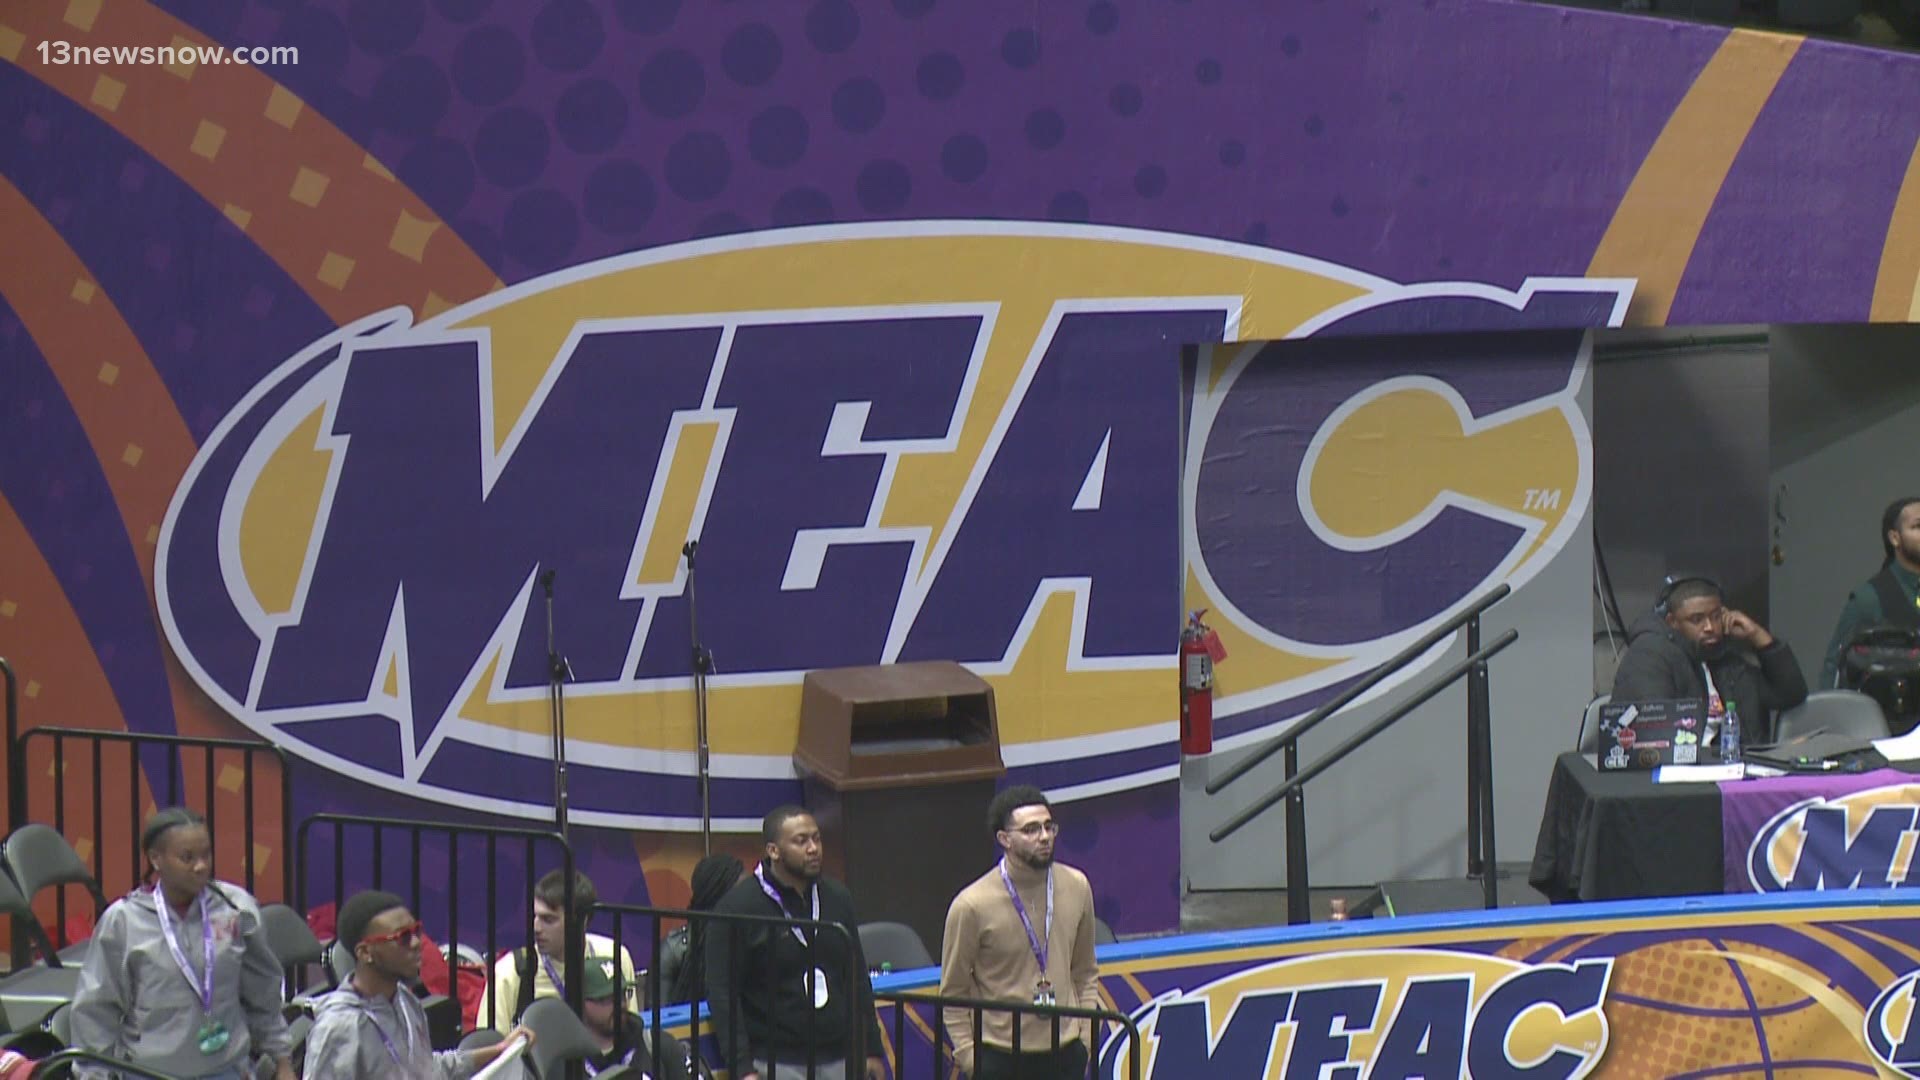 MEAC Conference officials are expected to update Norfolk leaders on how they plan to run the conference safely during the pandemic.